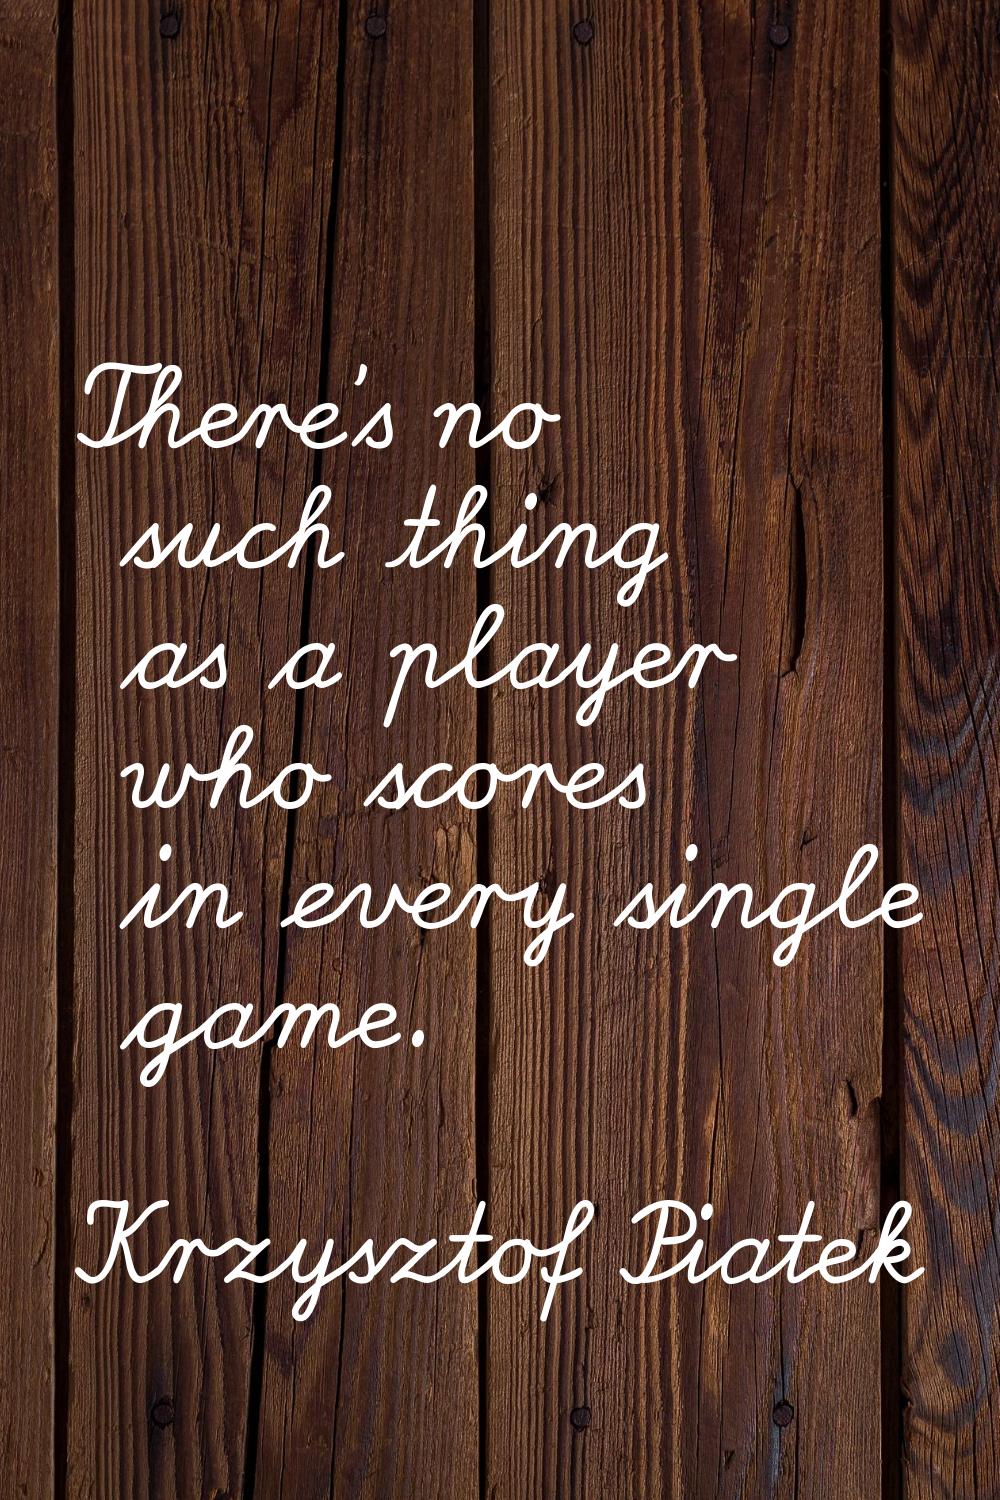 There's no such thing as a player who scores in every single game.